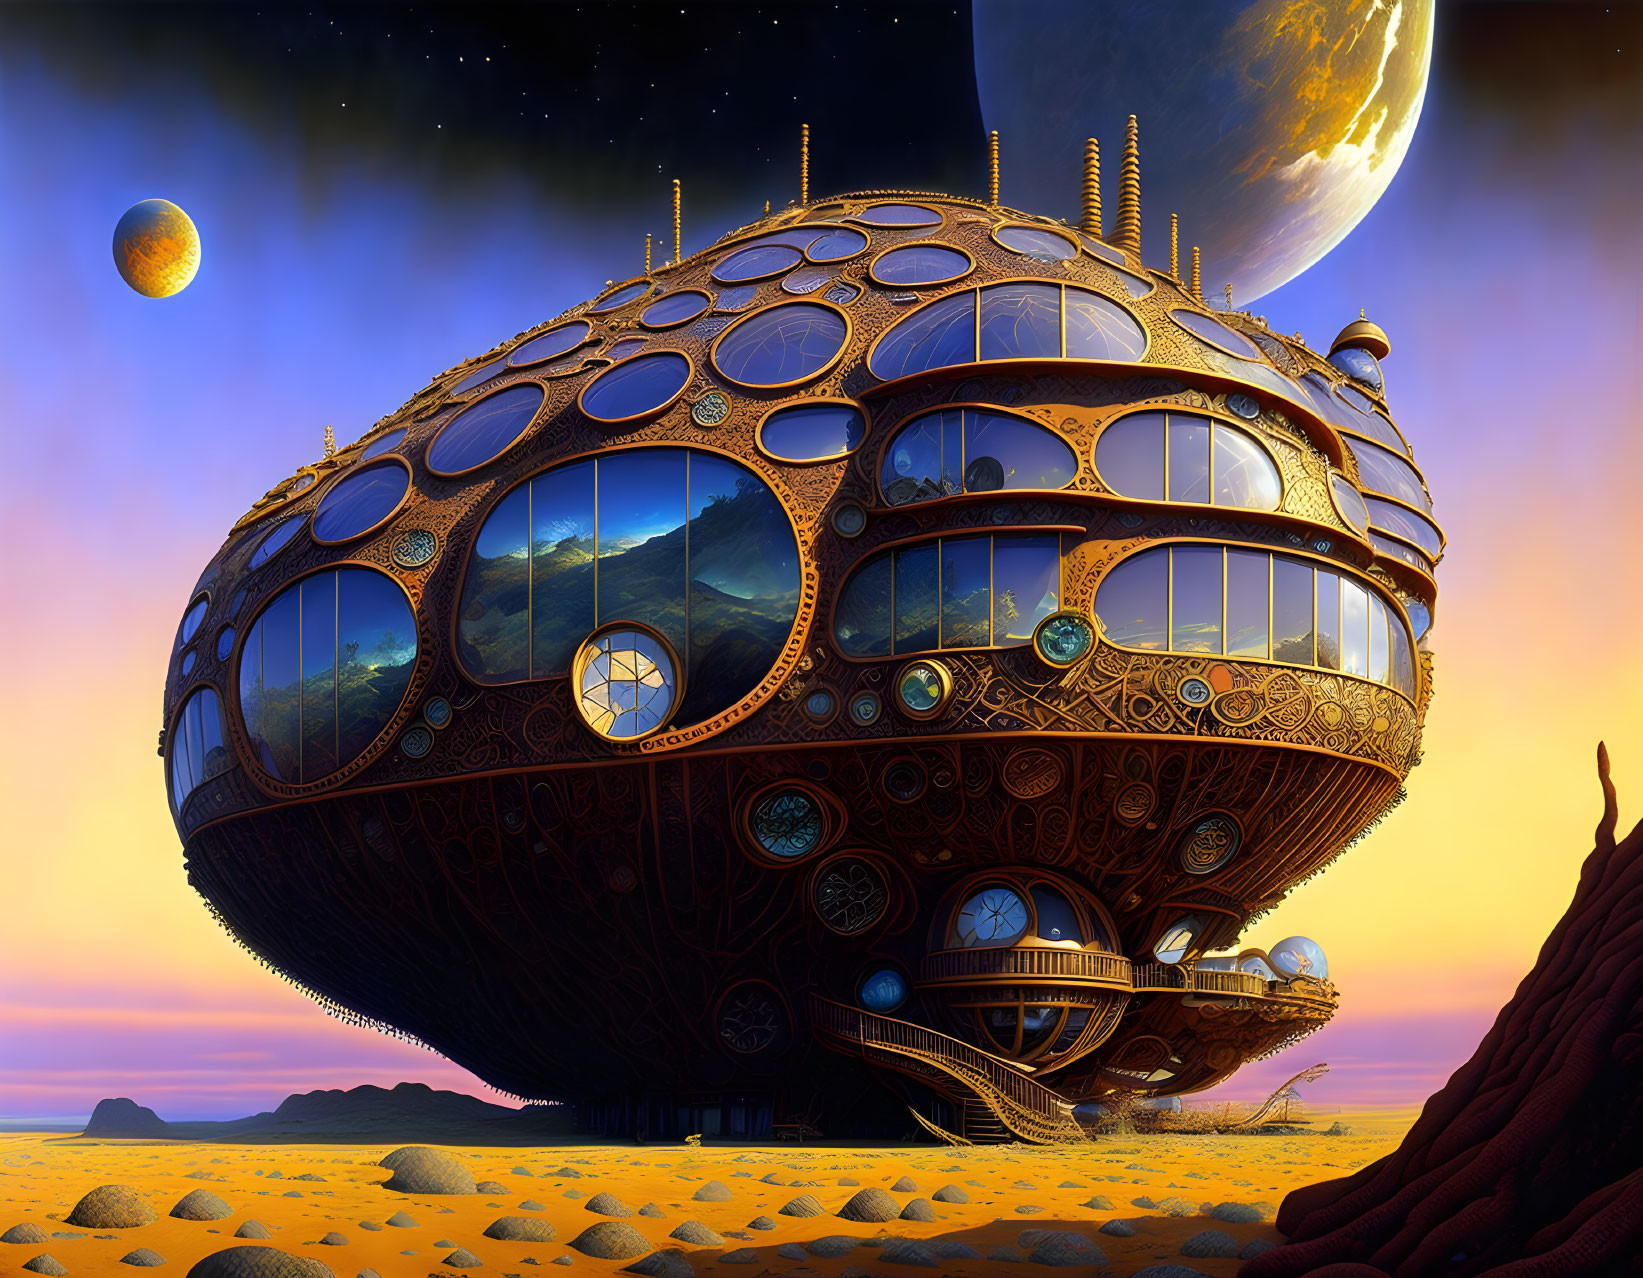 Steampunk-style spherical structure in desert landscape with circular windows